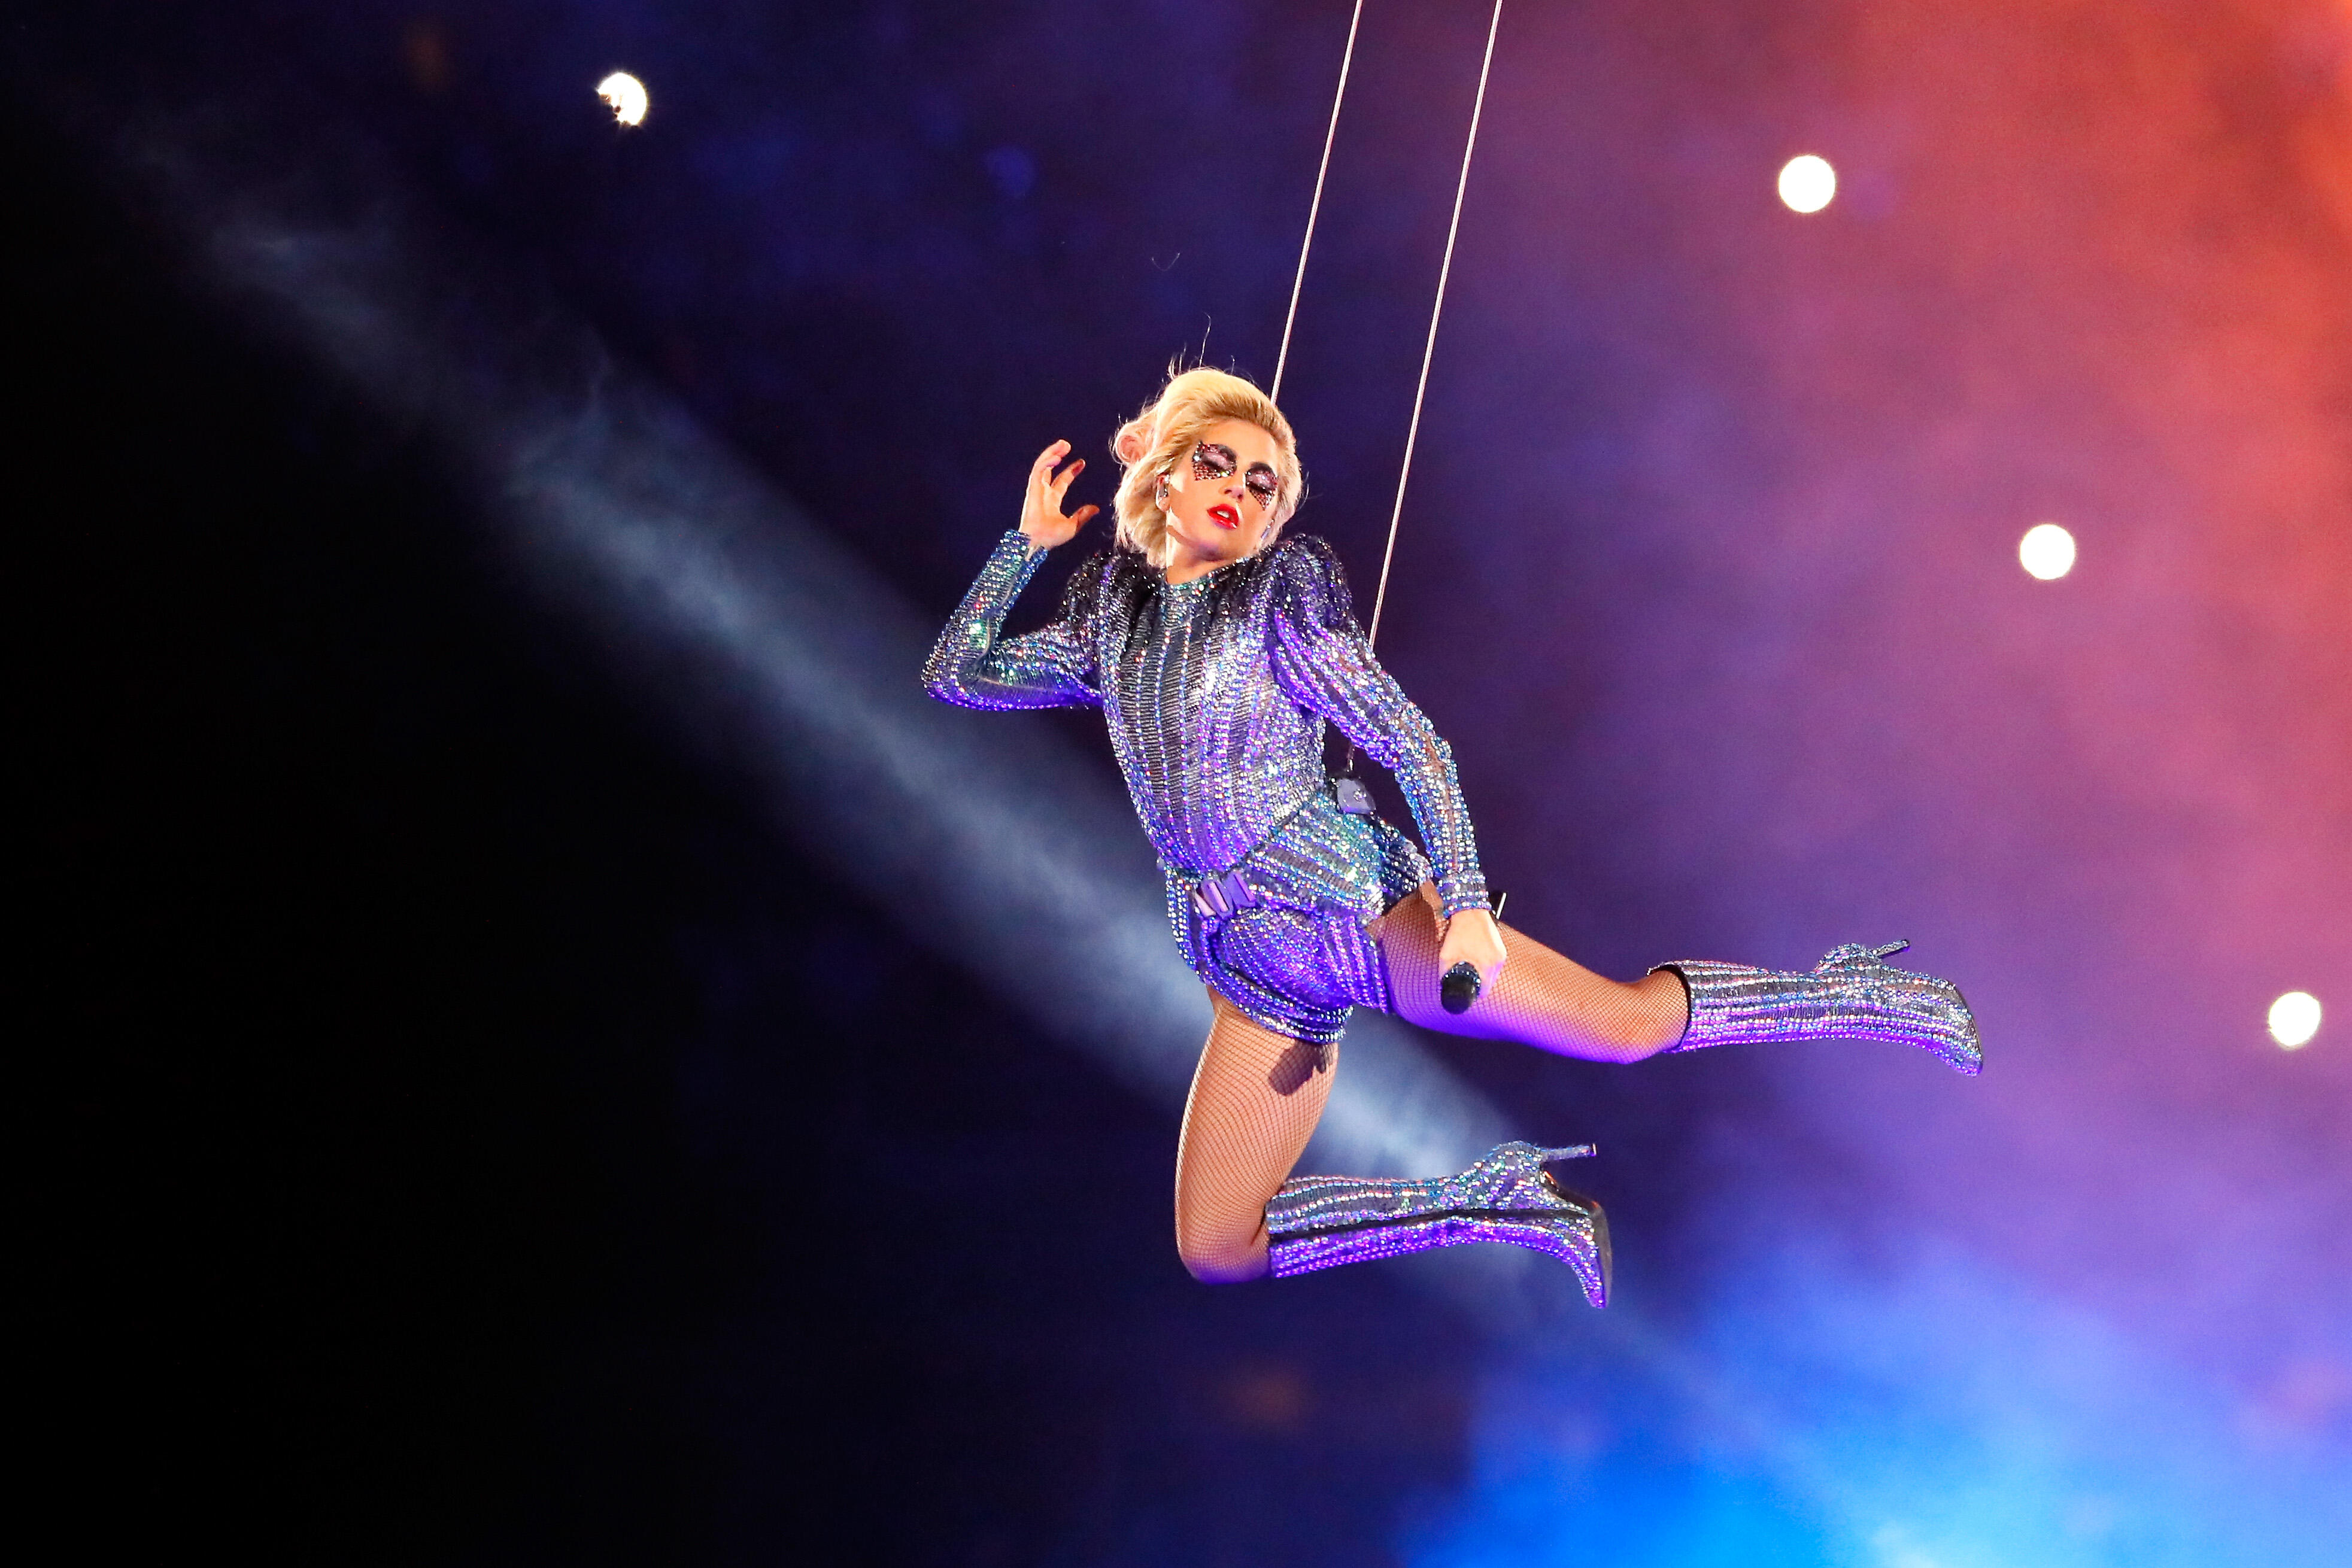 HOUSTON, TX - FEBRUARY 05: Lady Gaga performs during the Pepsi Zero Sugar Super Bowl 51 Halftime Show at NRG Stadium on February 5, 2017 in Houston, Texas.  (Photo by Patrick Smith/Getty Images)